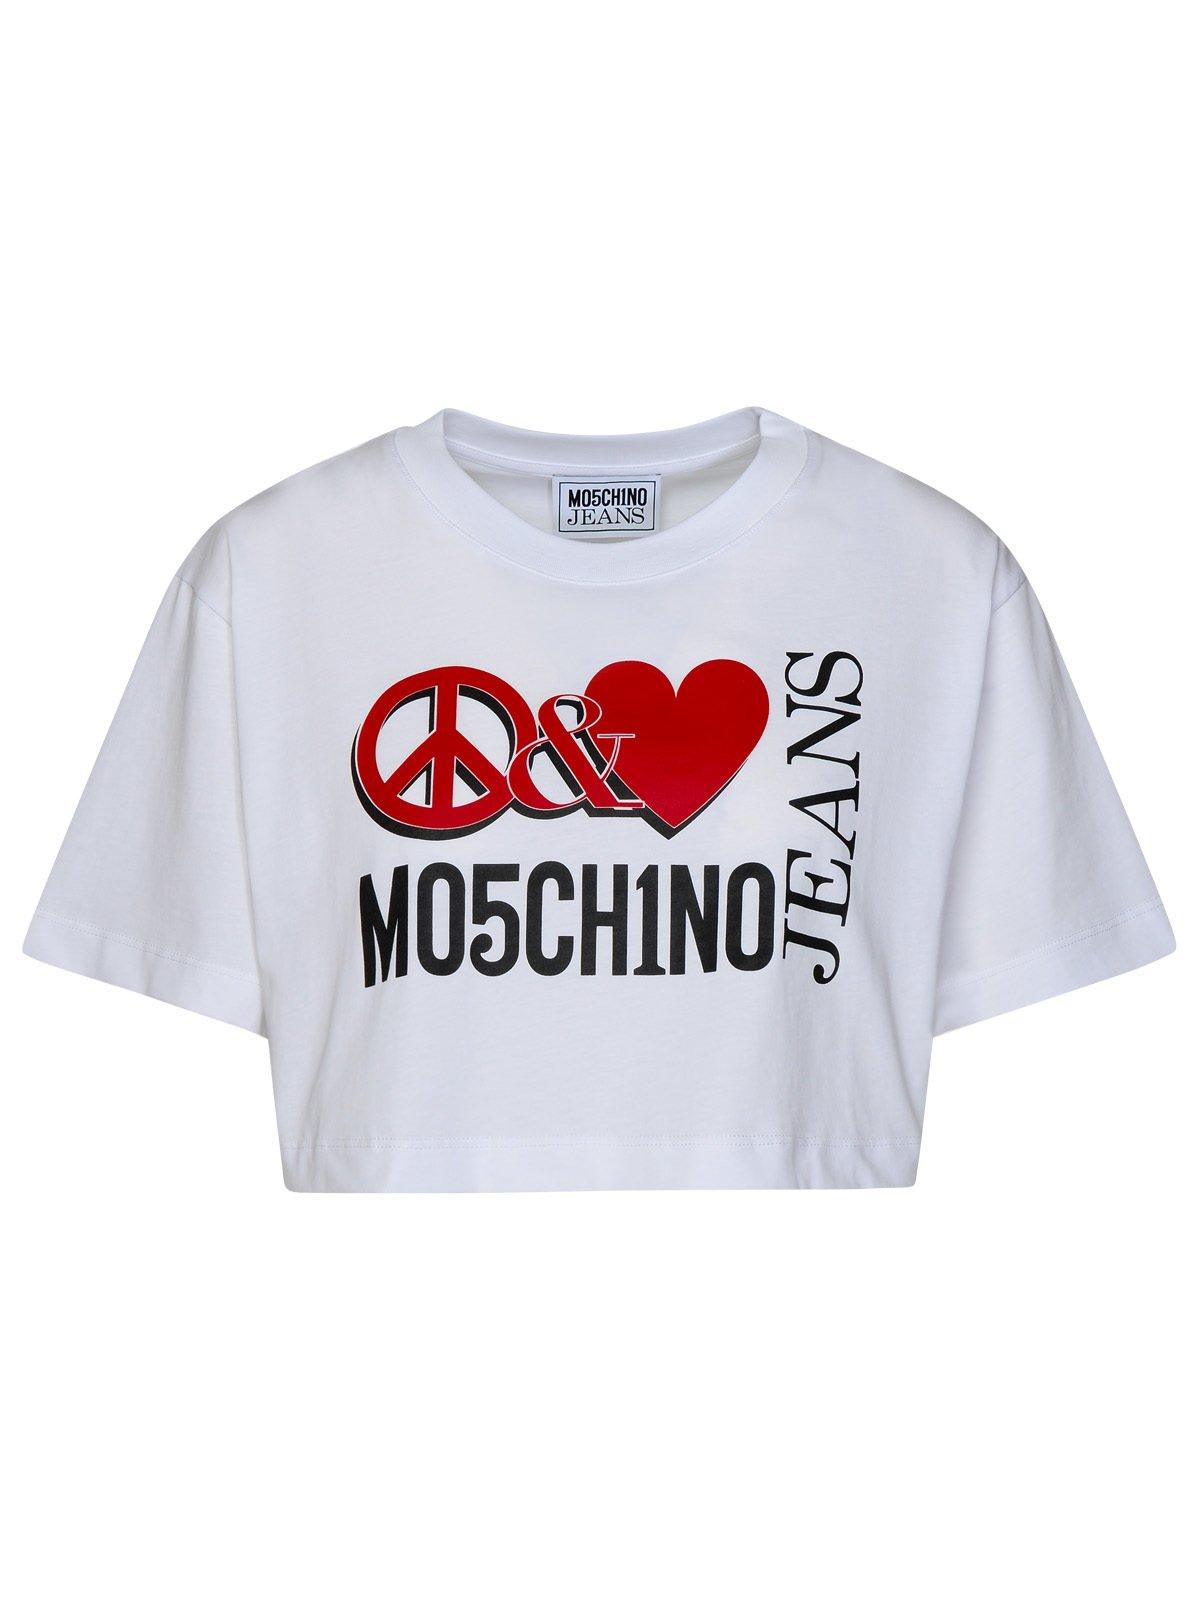 M05CH1N0 JEANS JEANS LOGO PRINTED CROPPED T-SHIRT